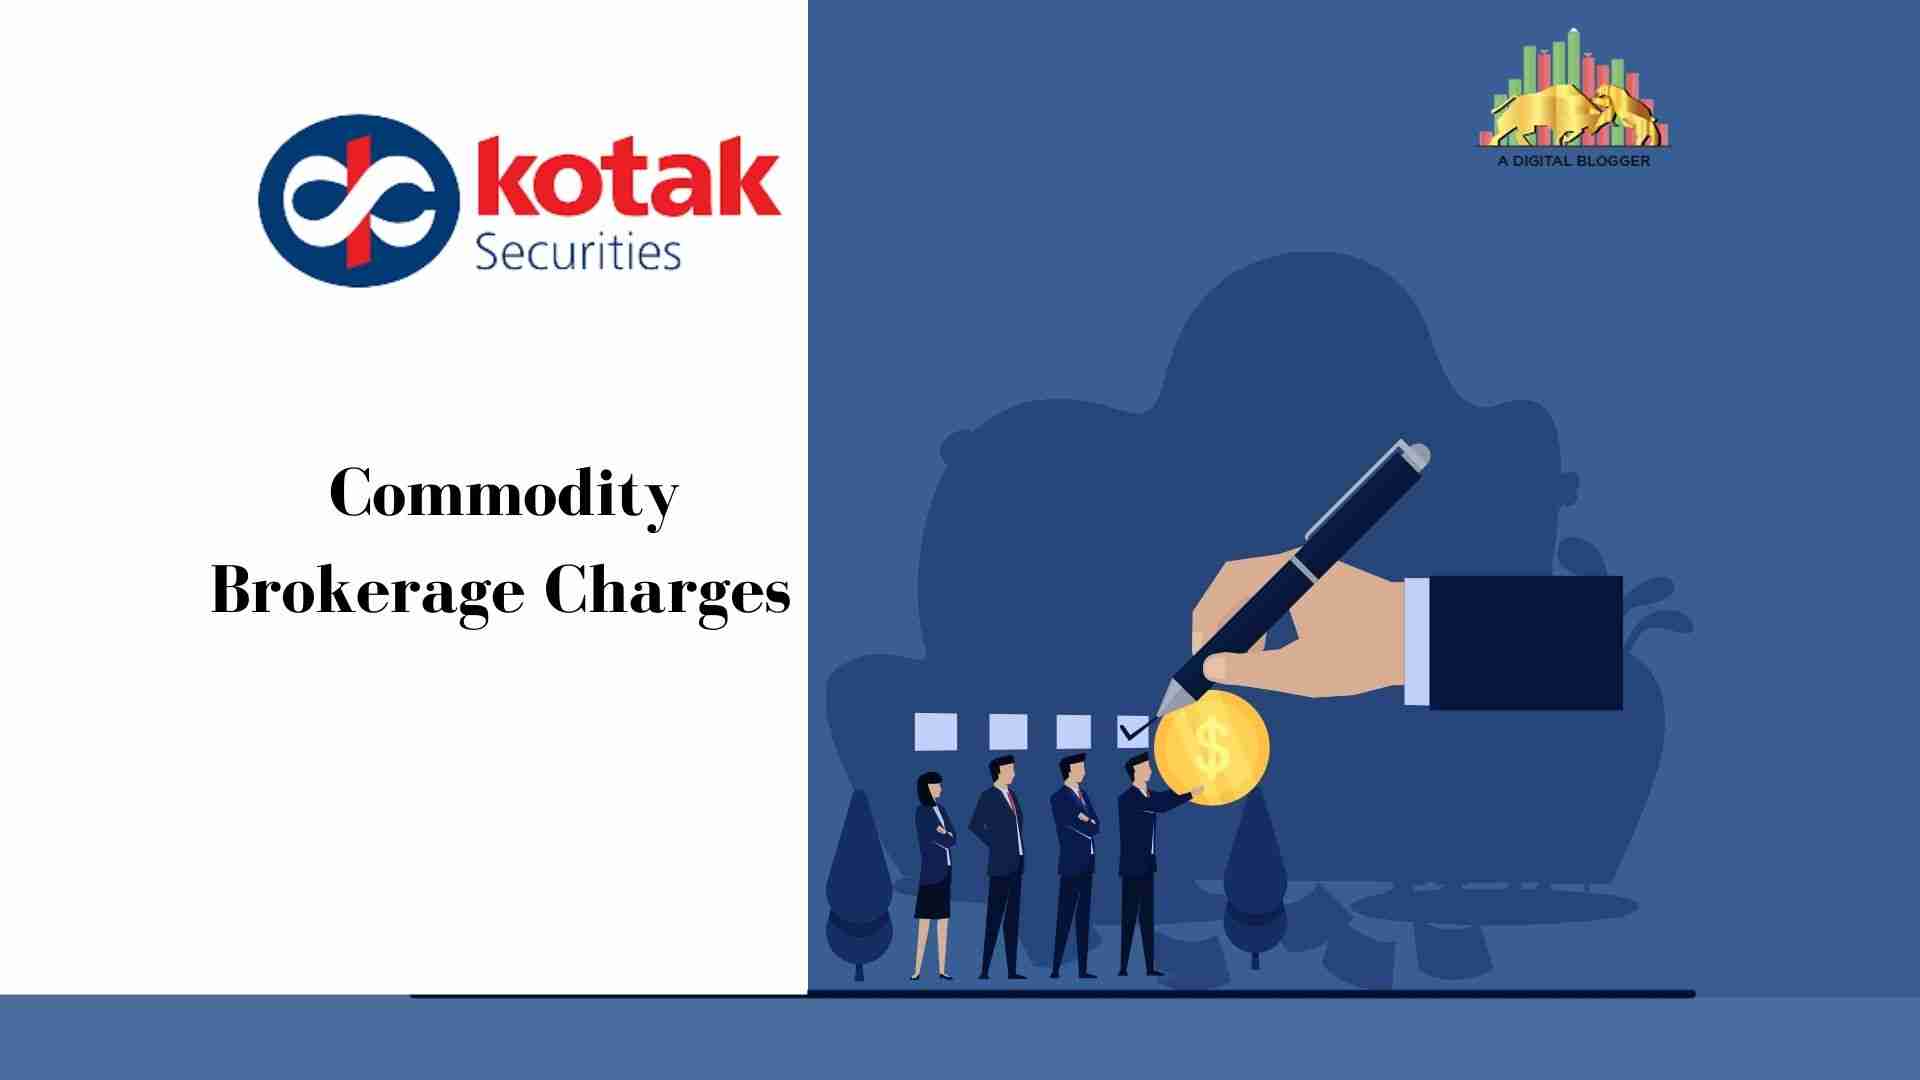 Kotak Commodity Brokerage Charges | Costs, Fees, Example